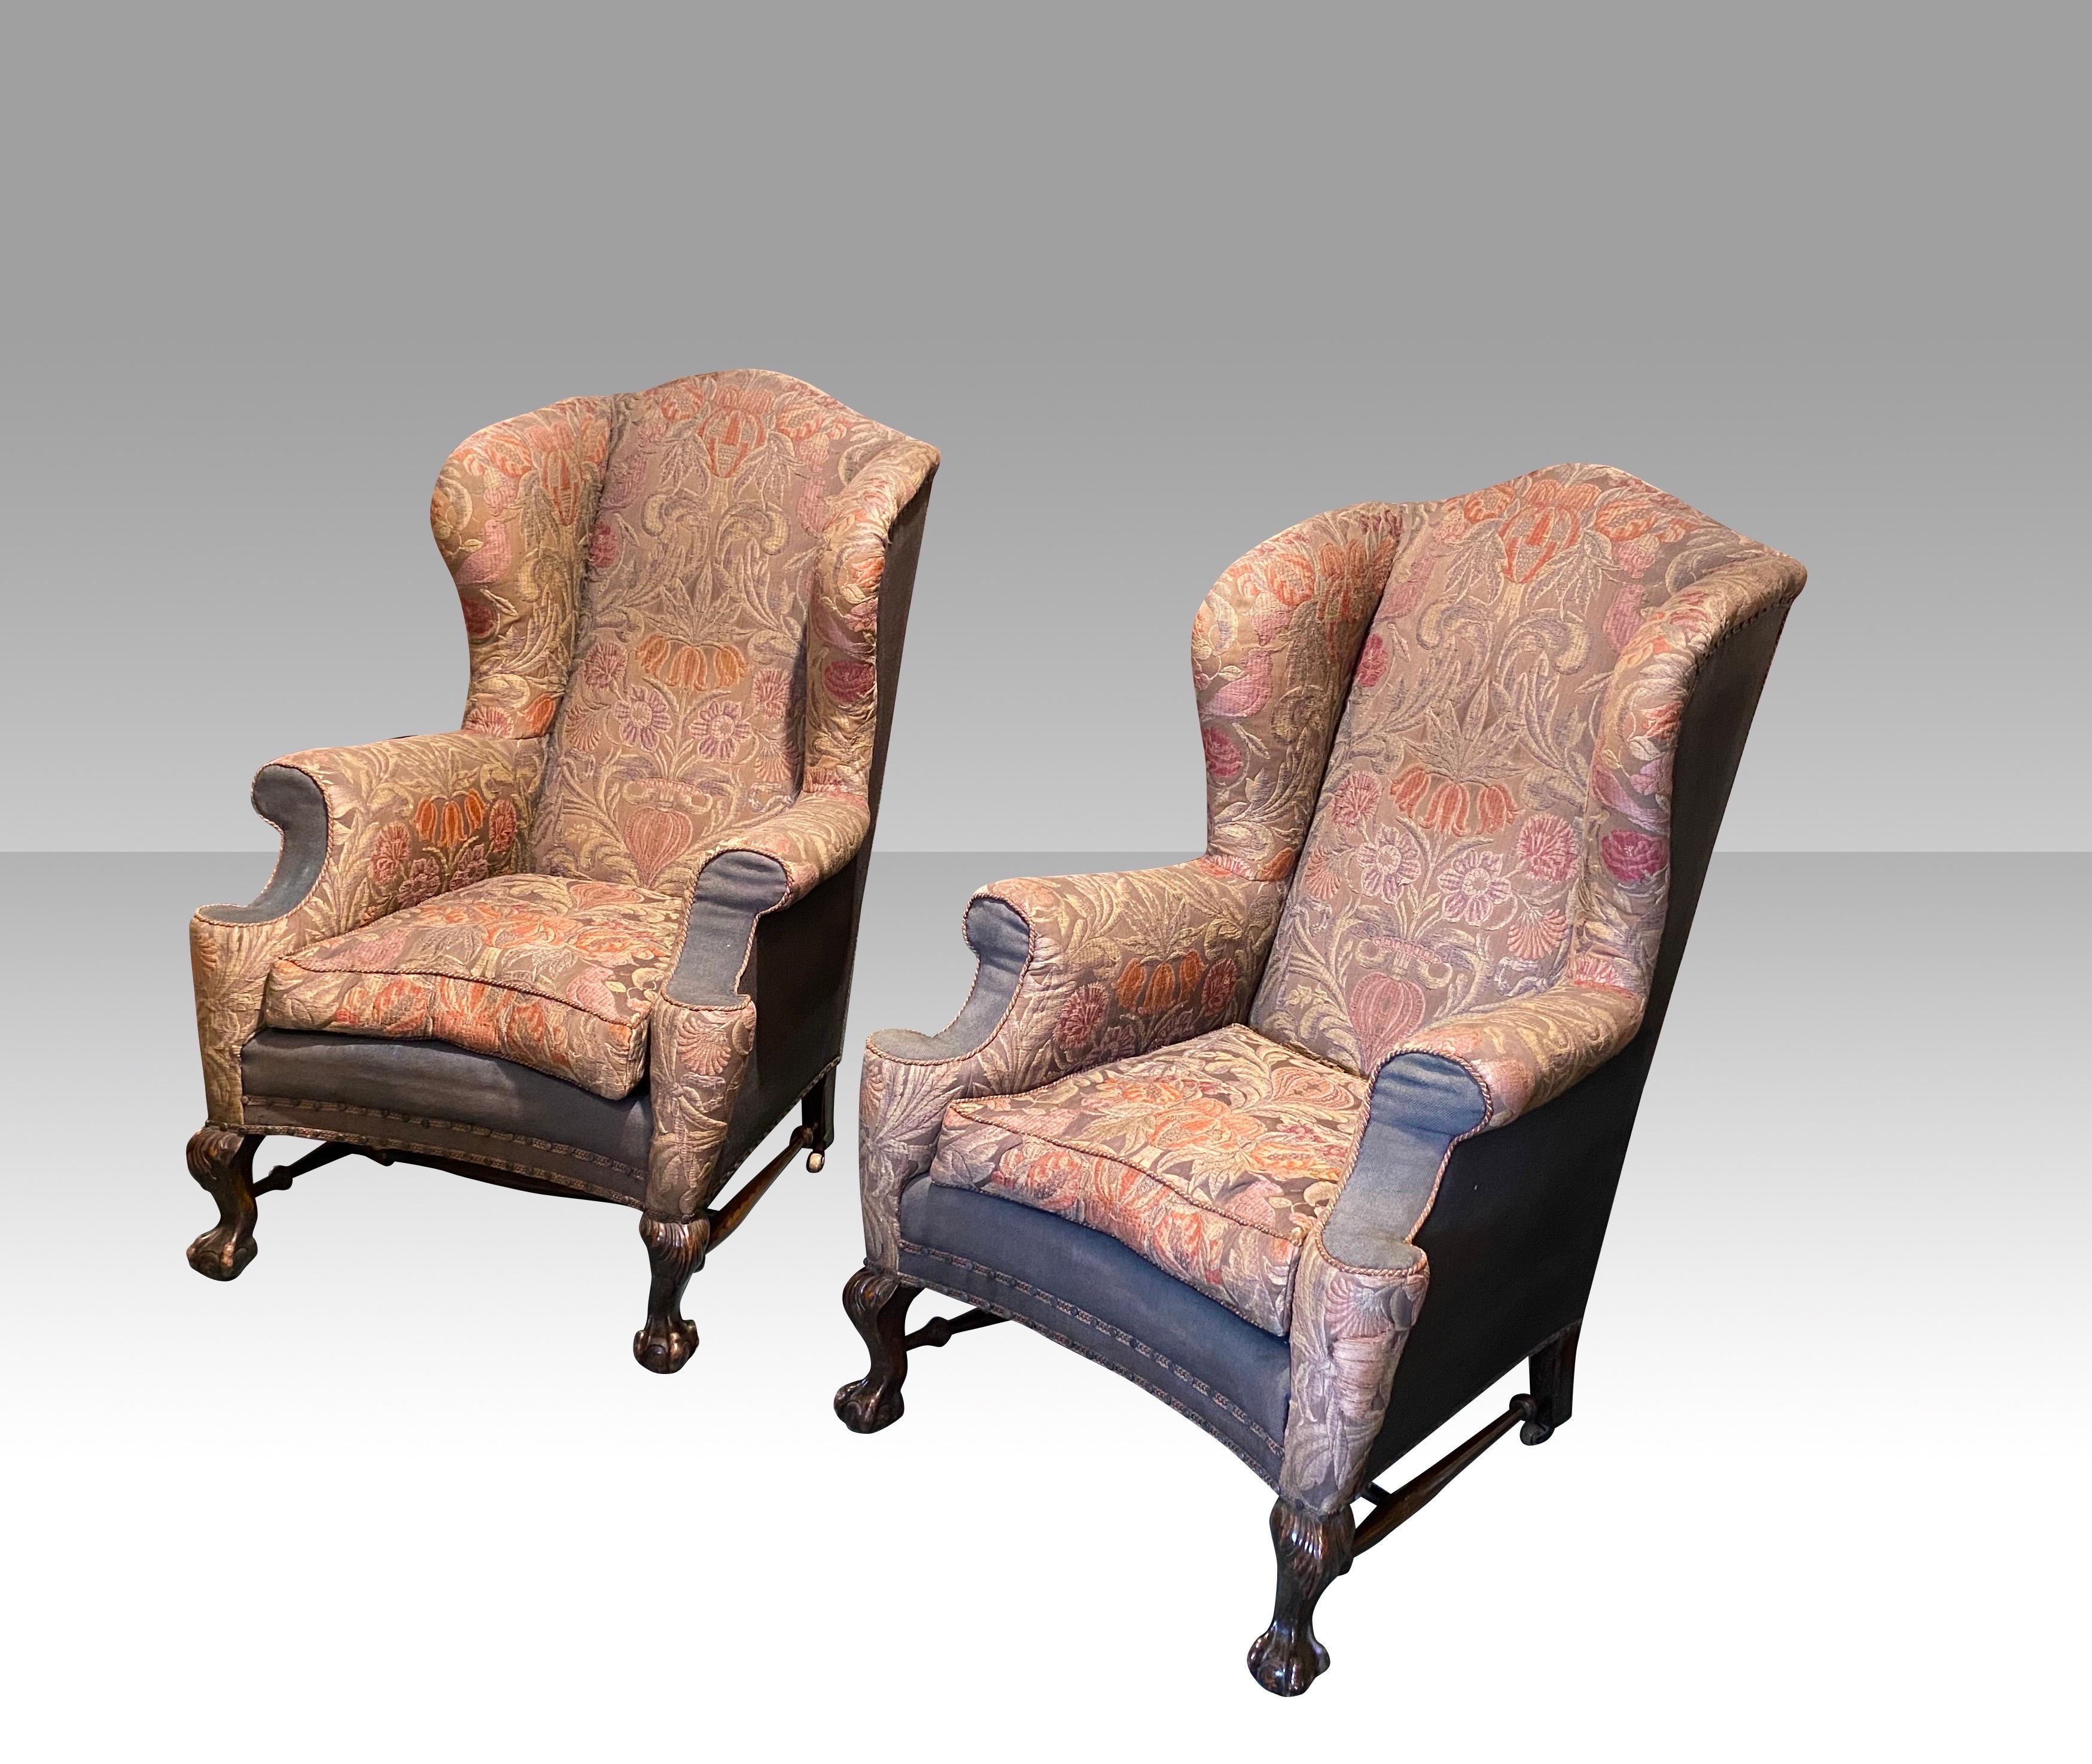 Fabulous pair of large antique wing back armchairs.
Georgian design, beautiful shape.
Mahogany ball and claw feet with stretchers,
Circa 1900
Measures: 54ins tall, 36ins deep, 33ins wide.
Extremely comfortable.
Tight of joint.
No tears on